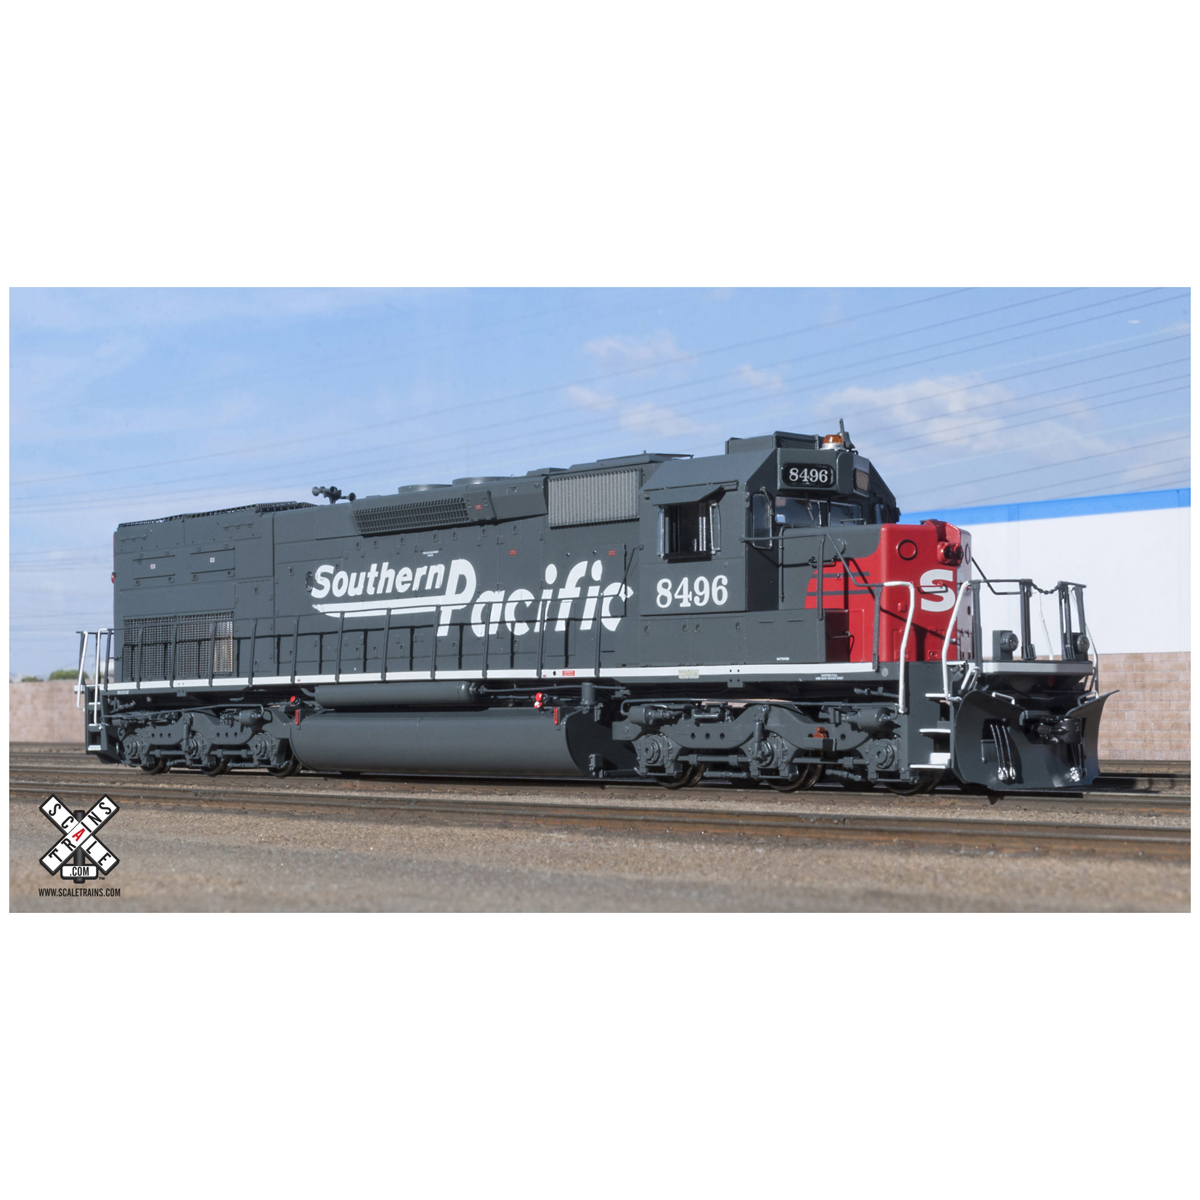 Rivet Counter HO Scale EMD SD38-2, Southern Pacific